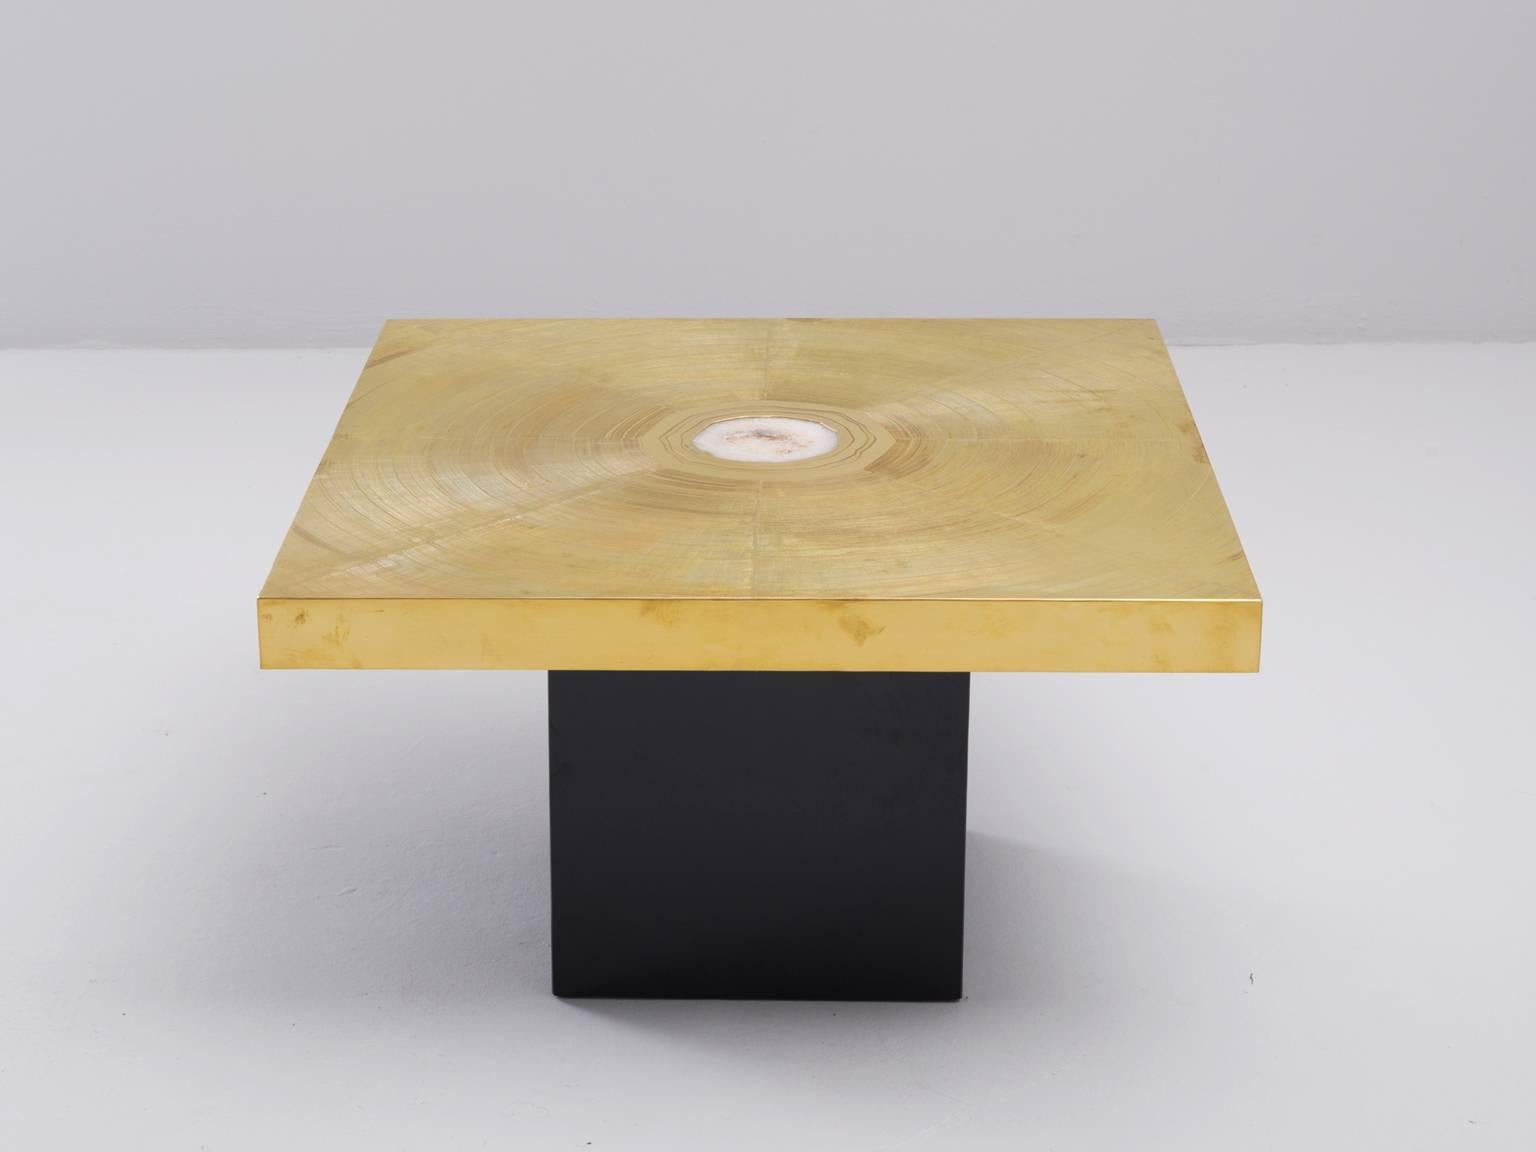 Coffee tables, in brass, gemstone and wood, Belgium 1970s

Signed Sculptural coffee table with beautiful etched brass top. This table is a piece of art on it's own. The square top shows a graphical spiral of lines in brass. In the middle is a